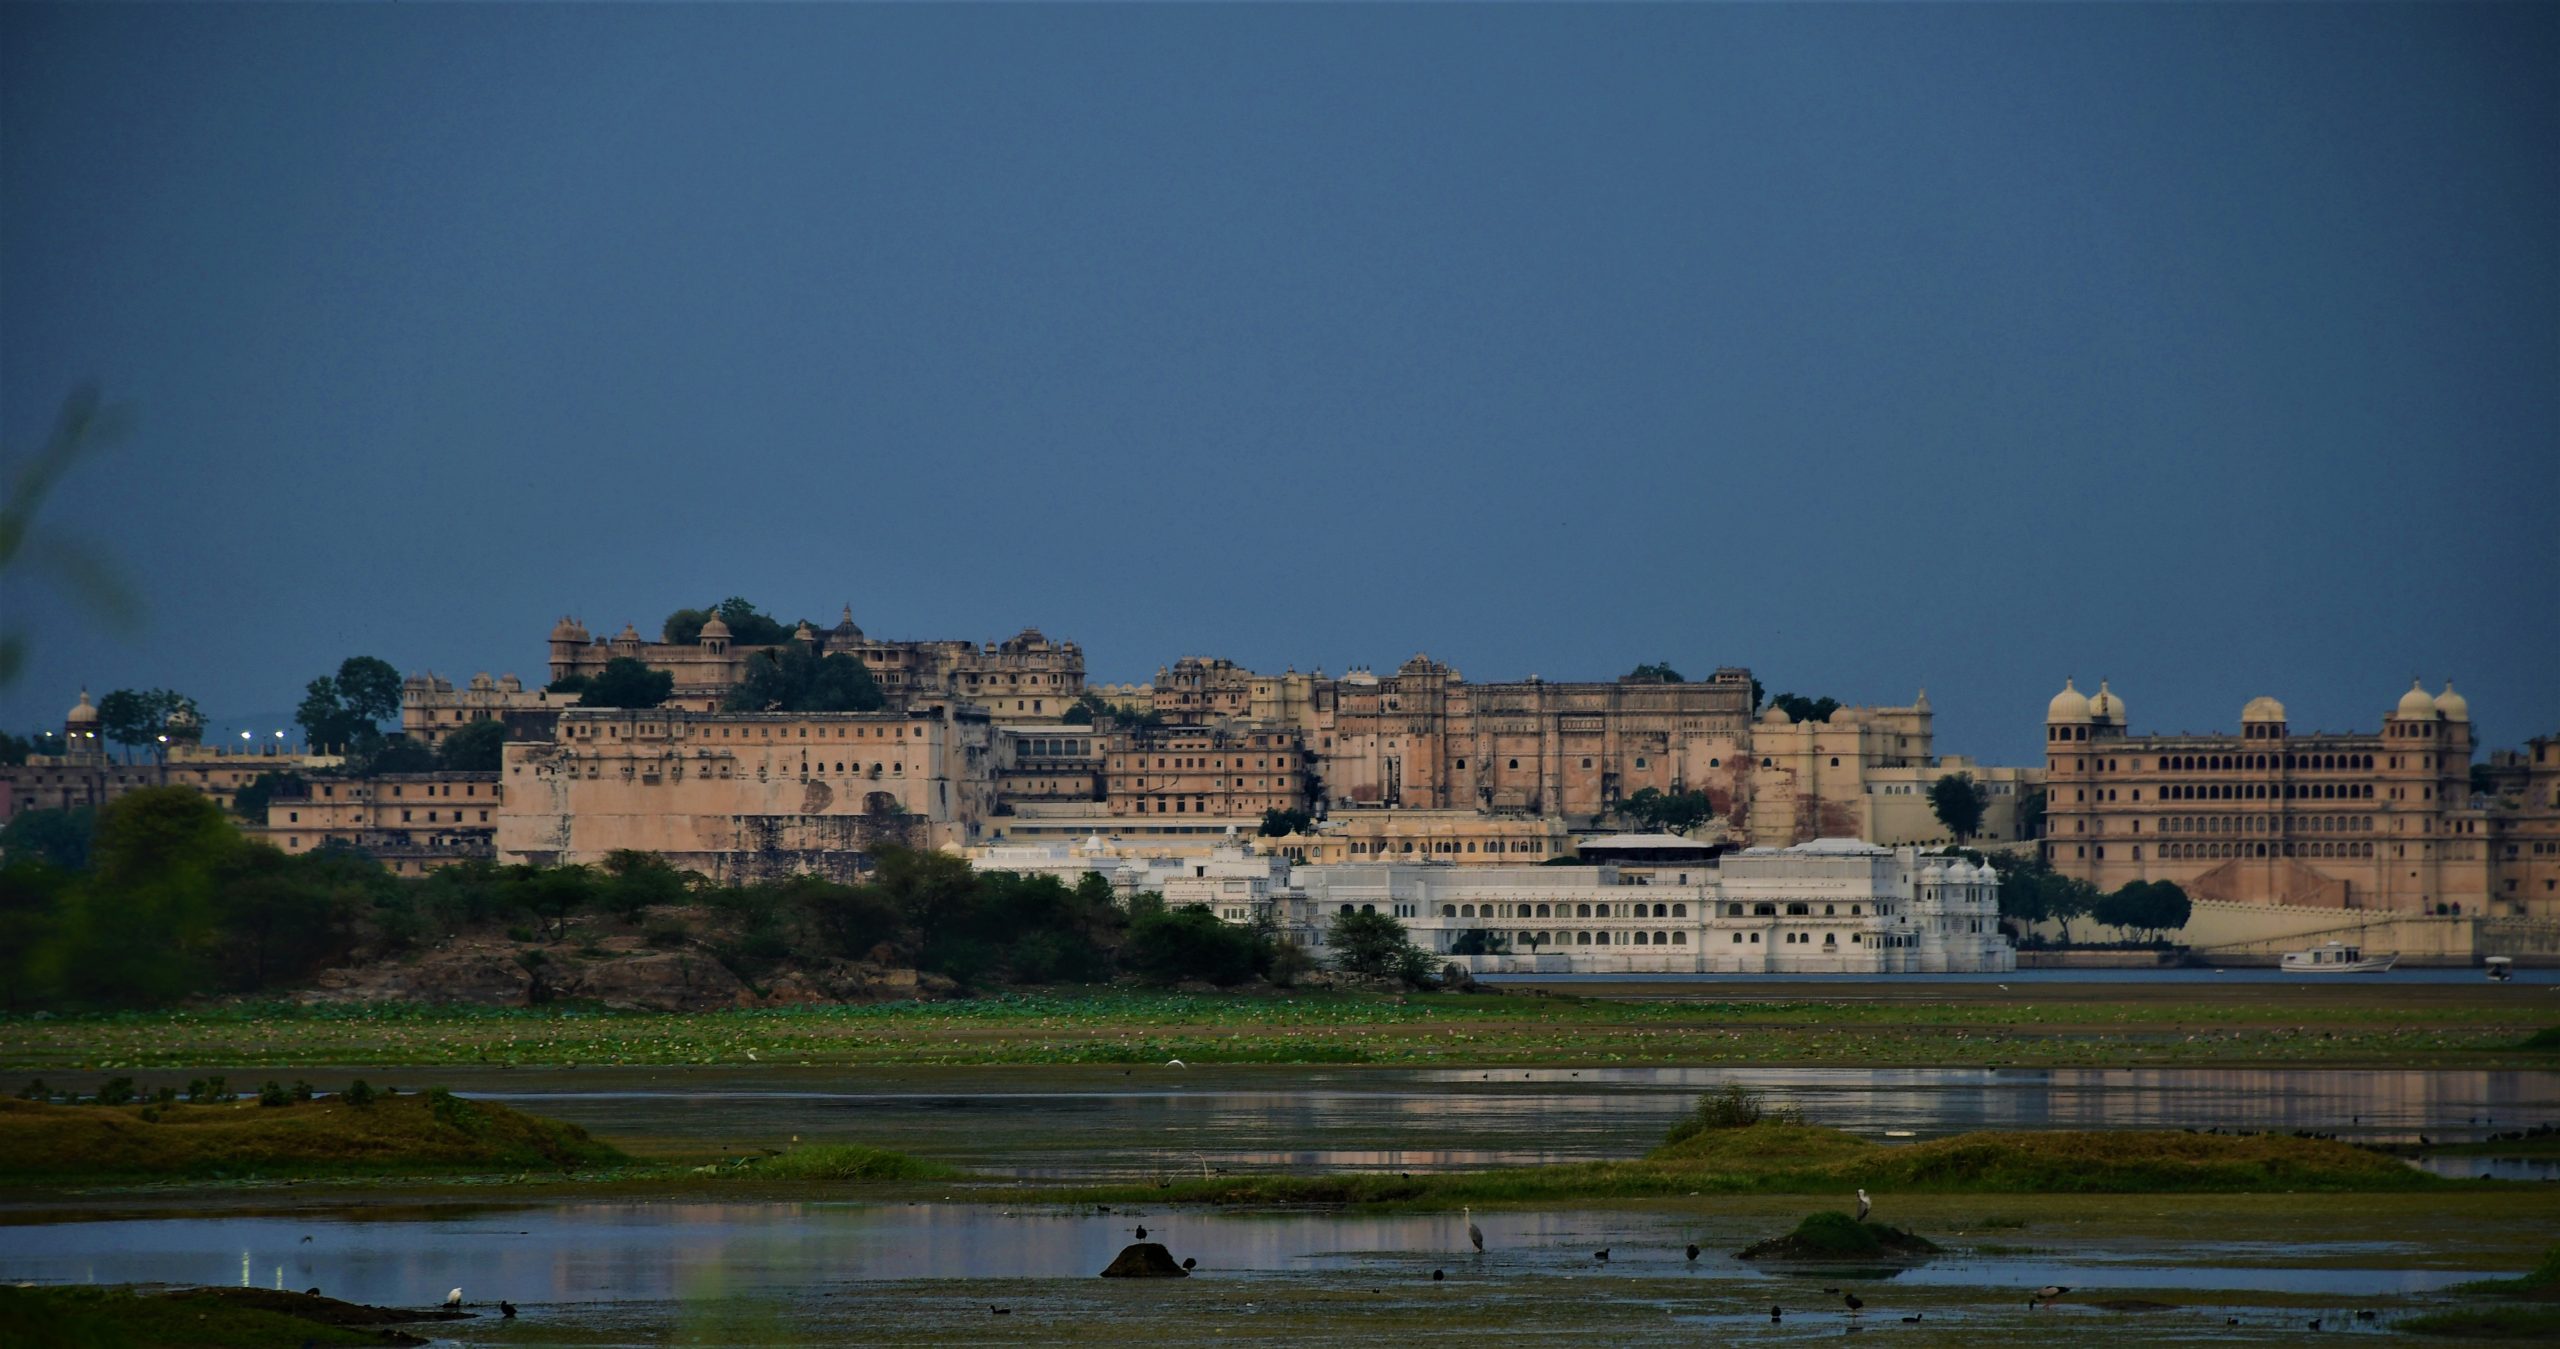 Udaipur City Palace from a different view